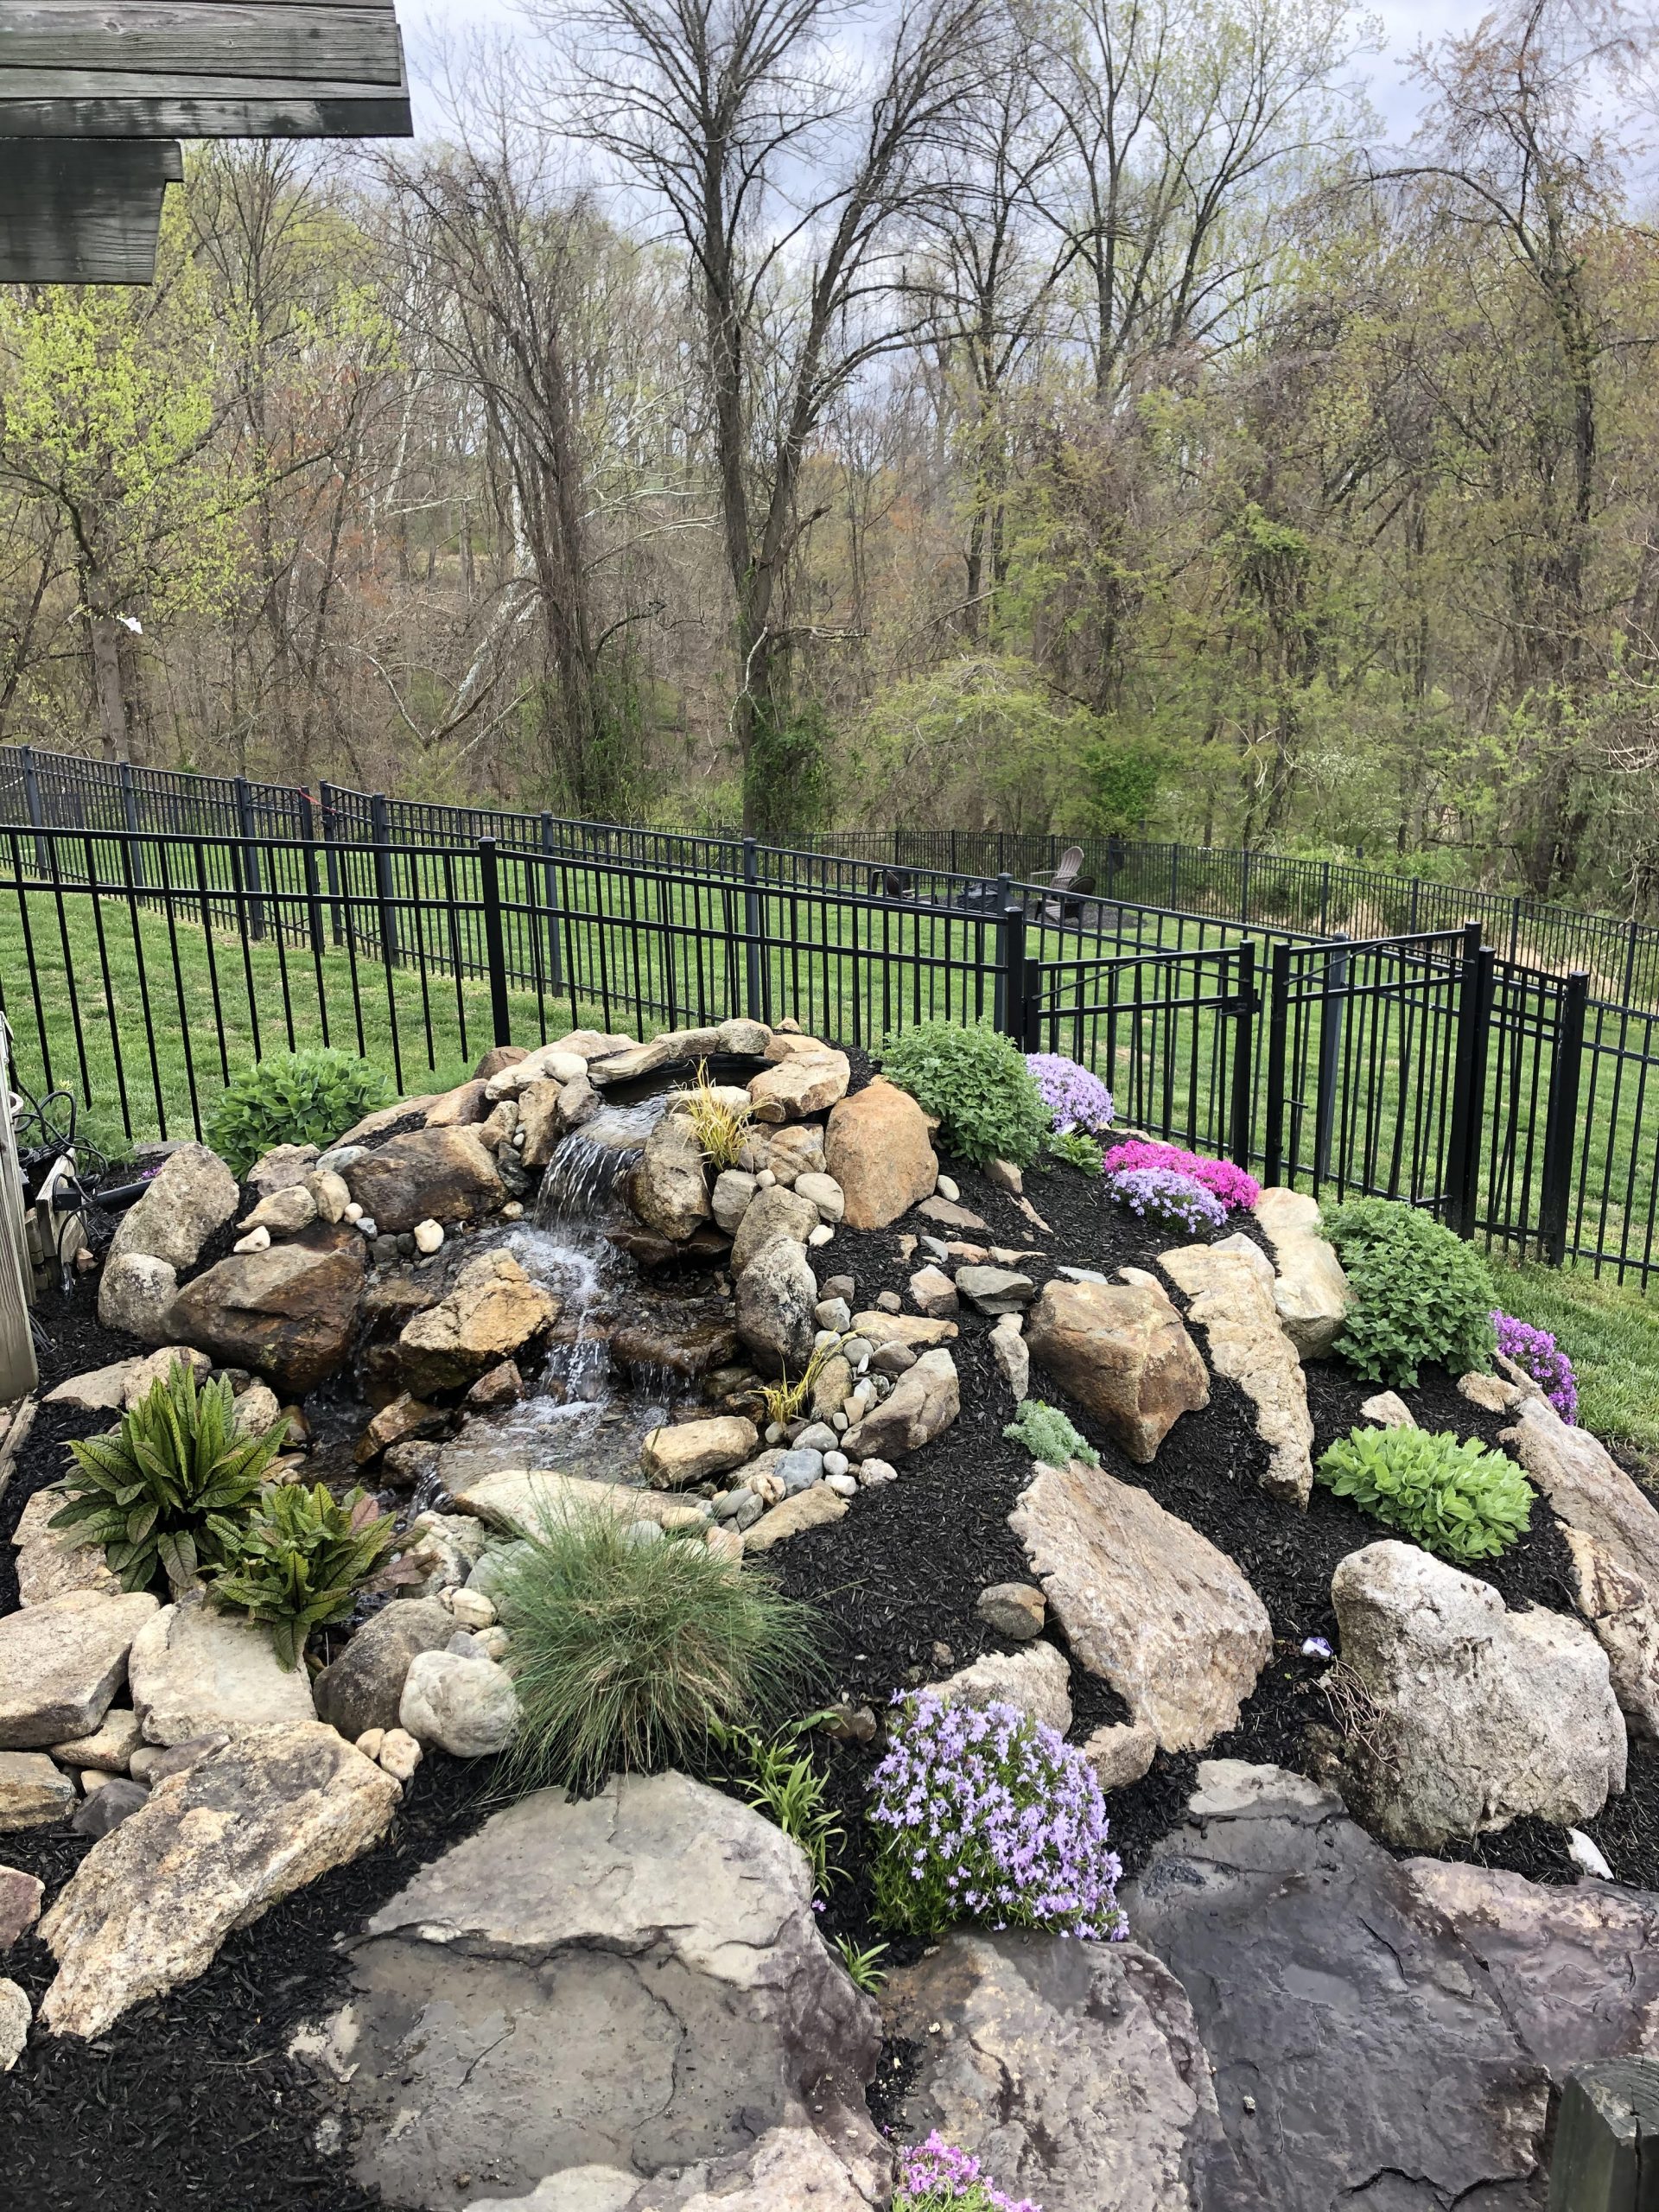 Exton, PA Residential & Commercial Landscaping Services. Best Residential & Commercial Landscaping Contractor in Exton, PA Professional Landscape Designer